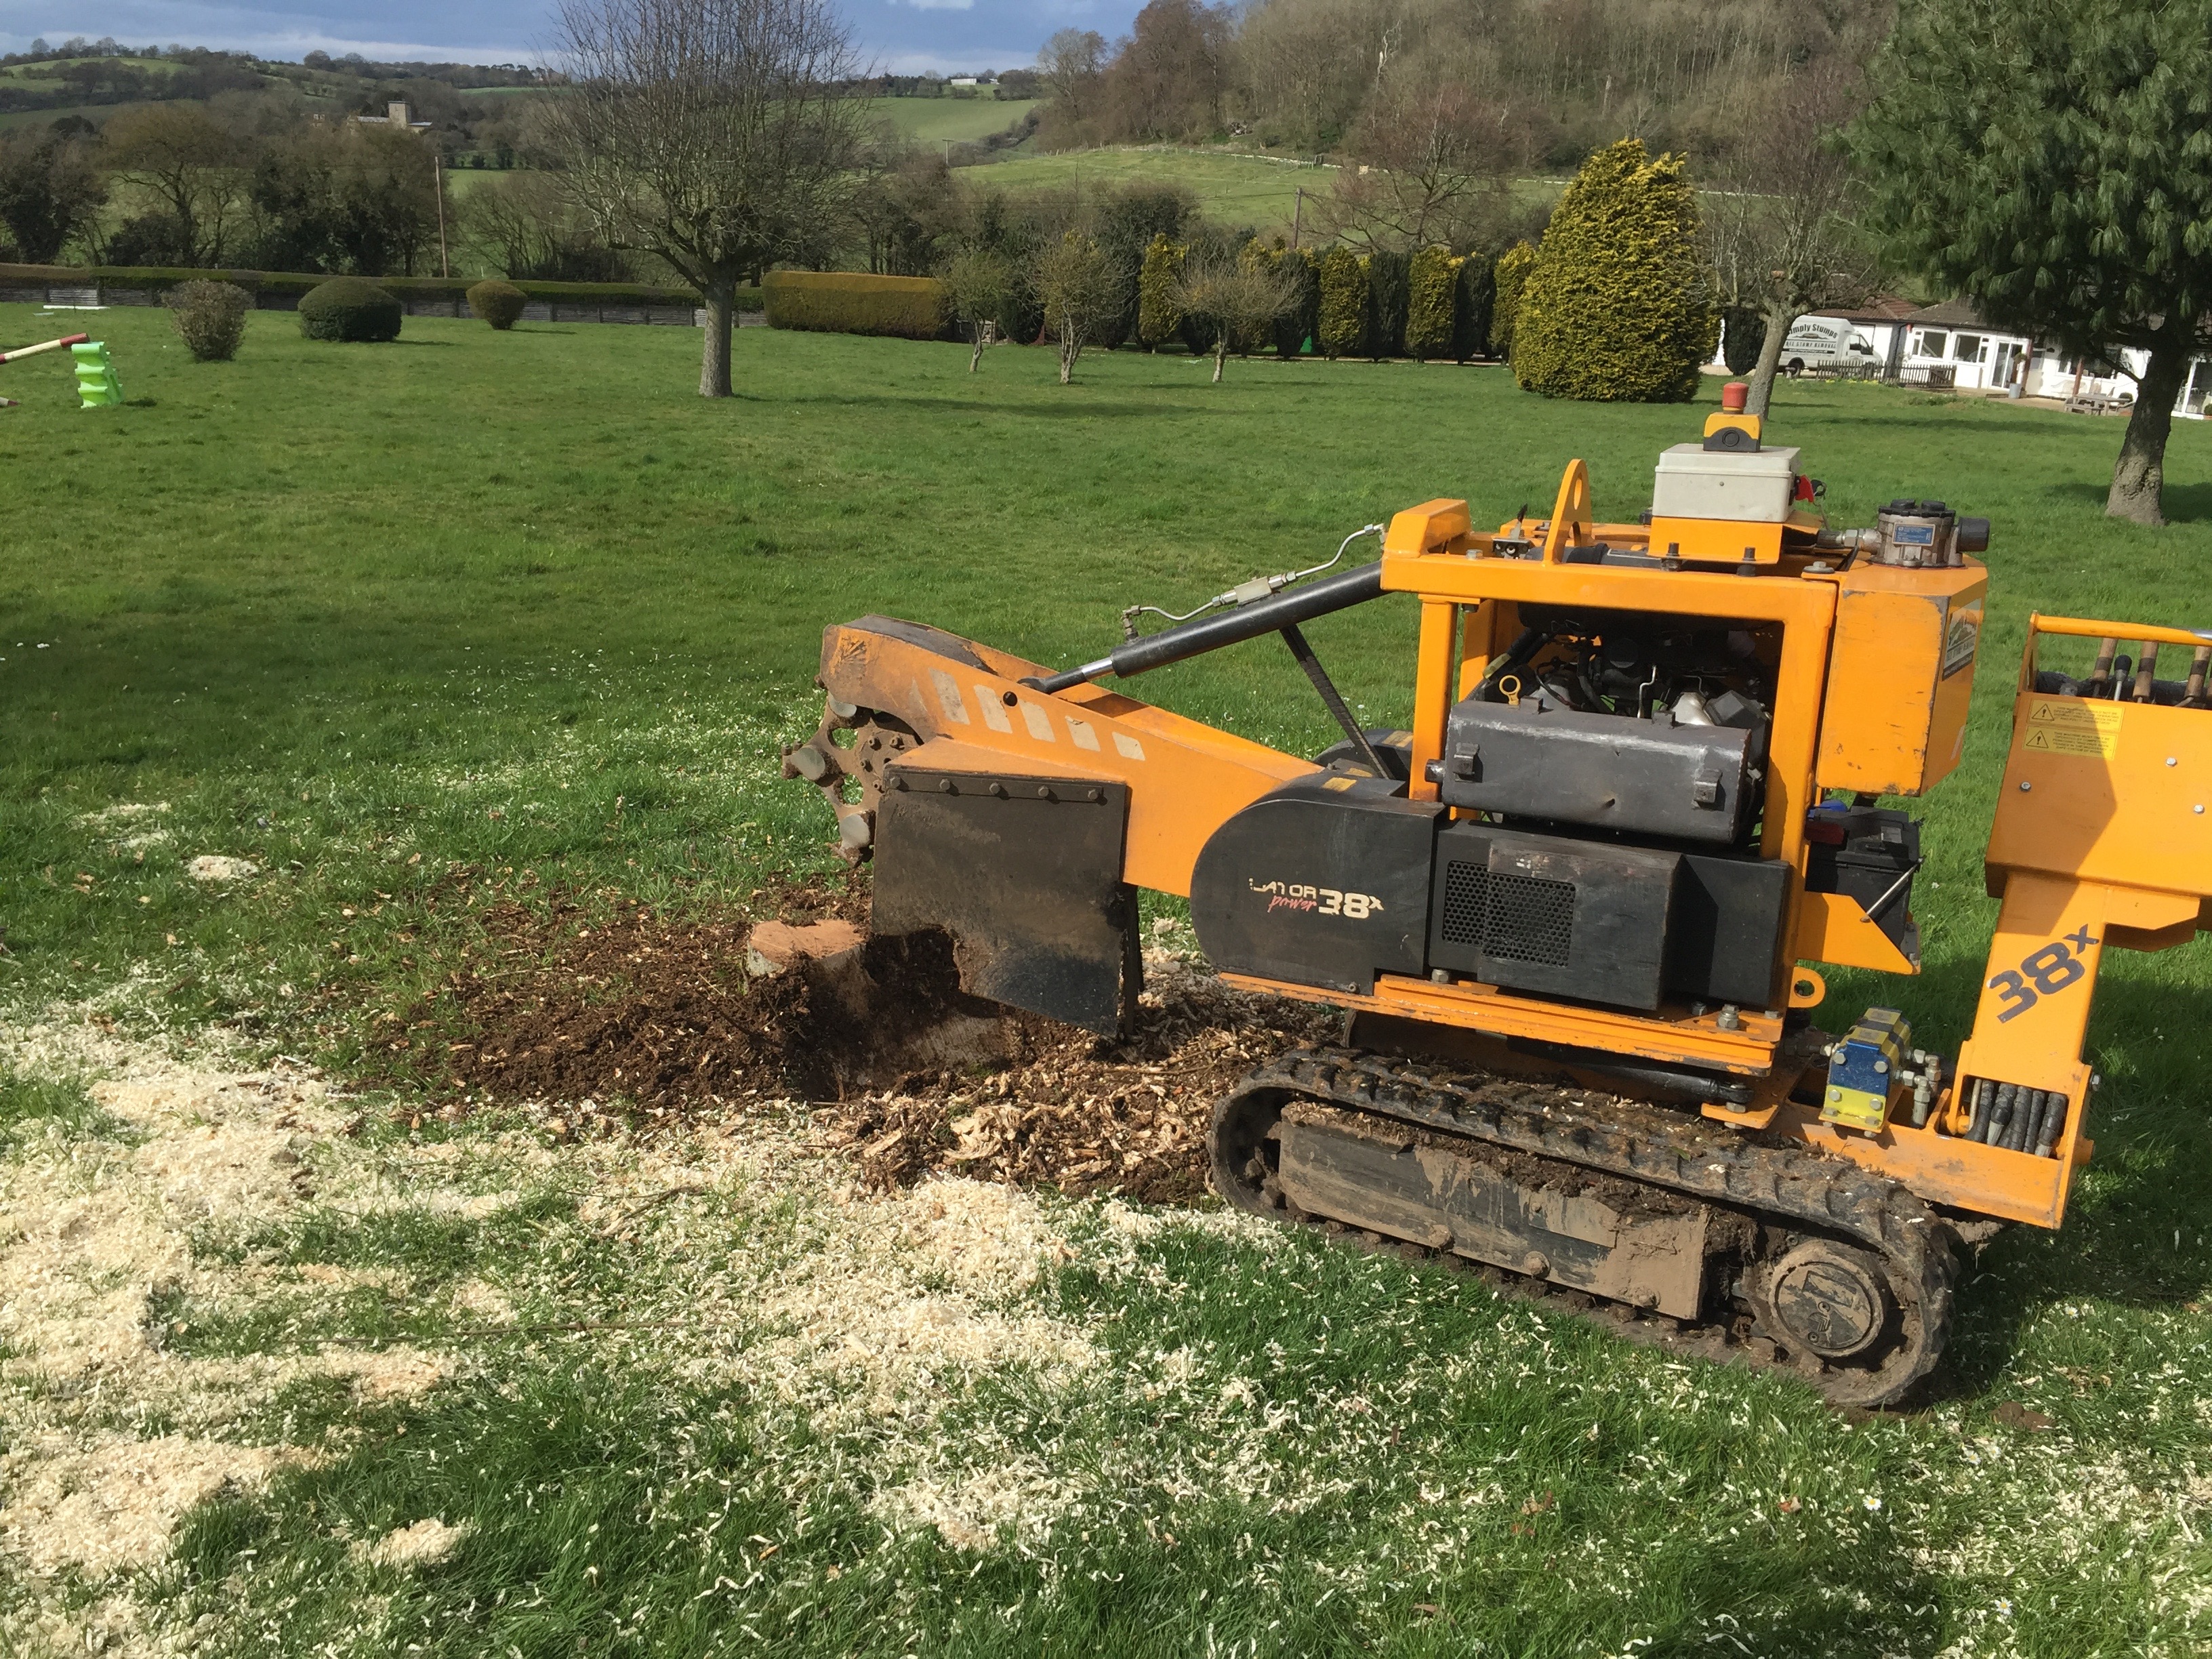 Read more about the article Stump grinding Sycamore stumps in Radnage to protect horses.